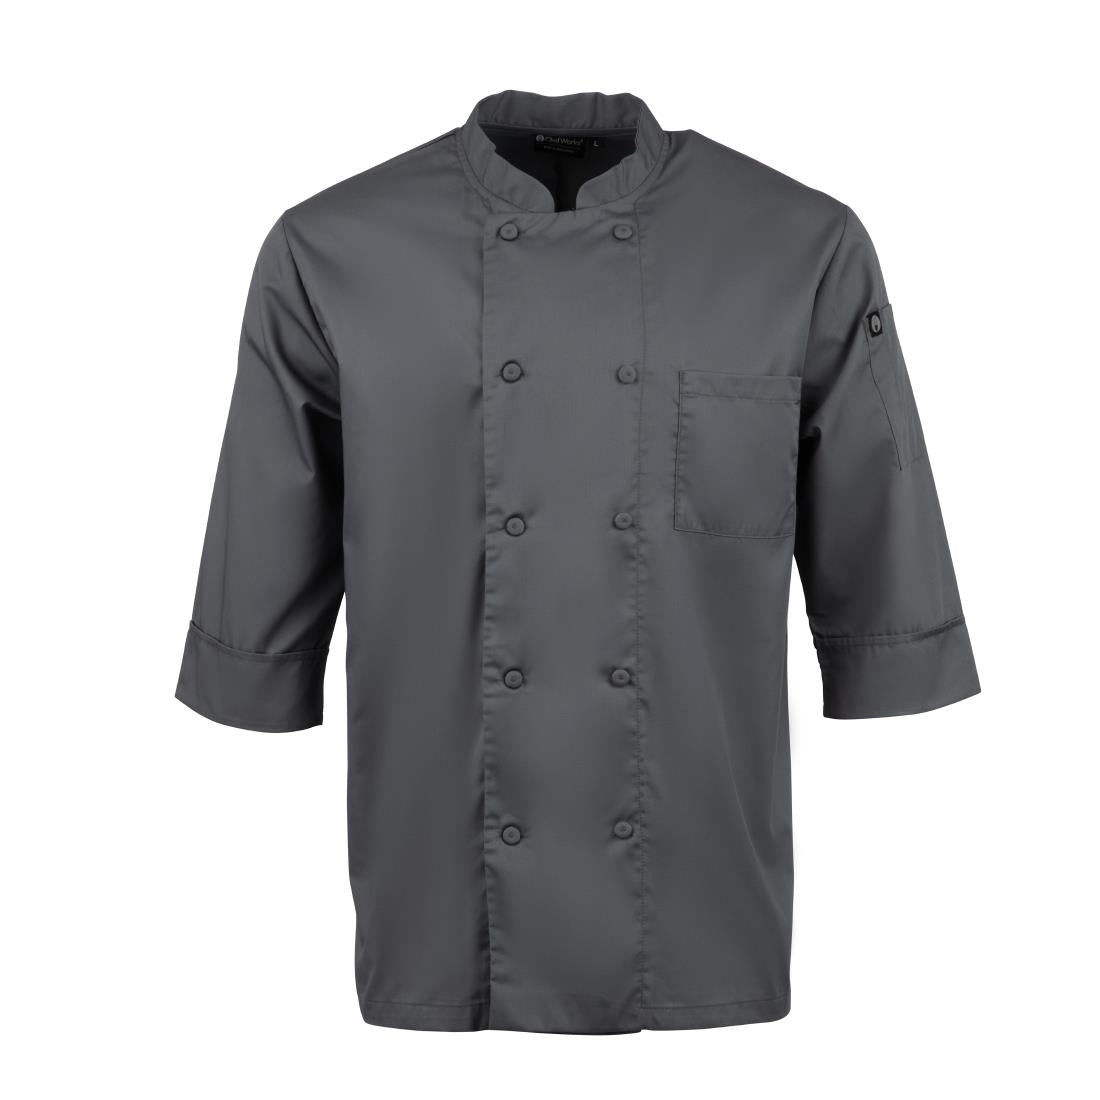 A934-L Chef Works Unisex Chefs Jacket Grey L JD Catering Equipment Solutions Ltd